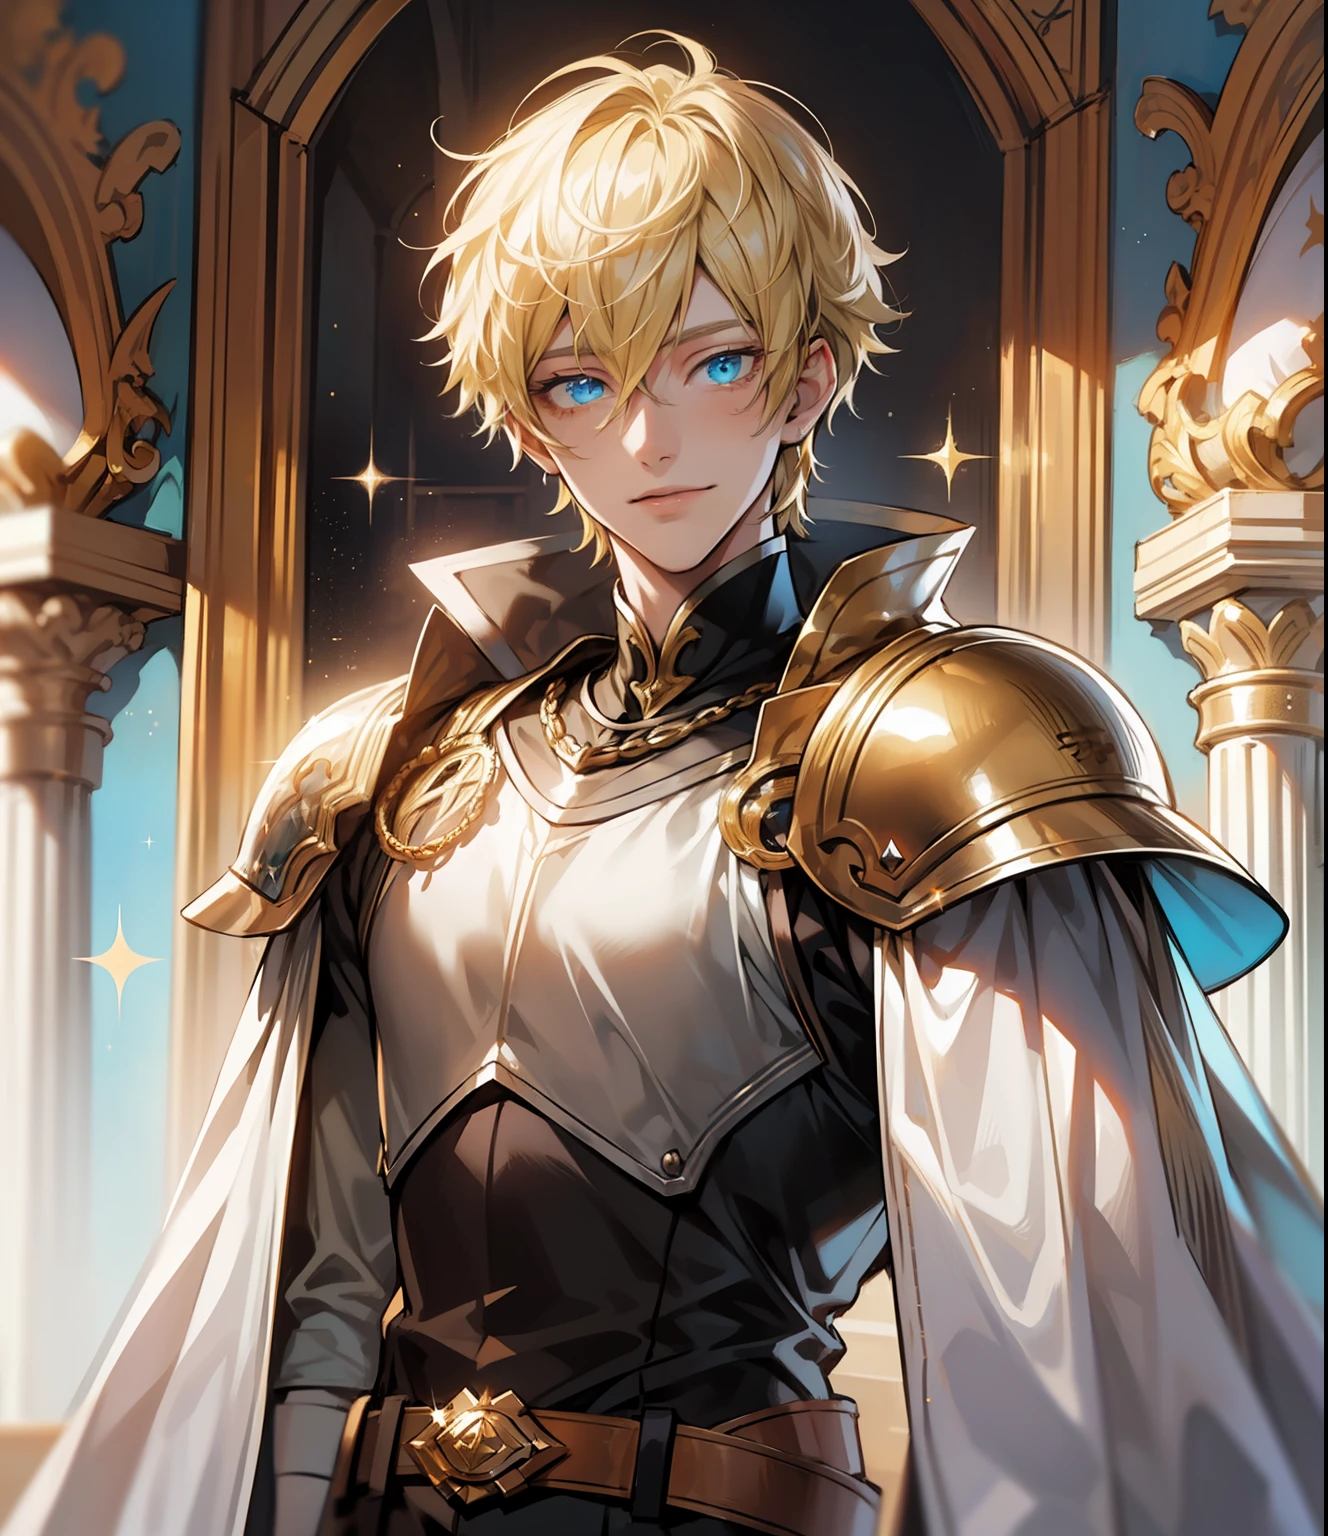 (tmasterpiece), portraite of a, 1boy, amazing quality, Detailed knight-prince, Age 16 years, (Sparkly light, hair light, blonde man), Cyan eyes, ssmile, inspiration, Breathtaking speech, upper-body, Princely clothes